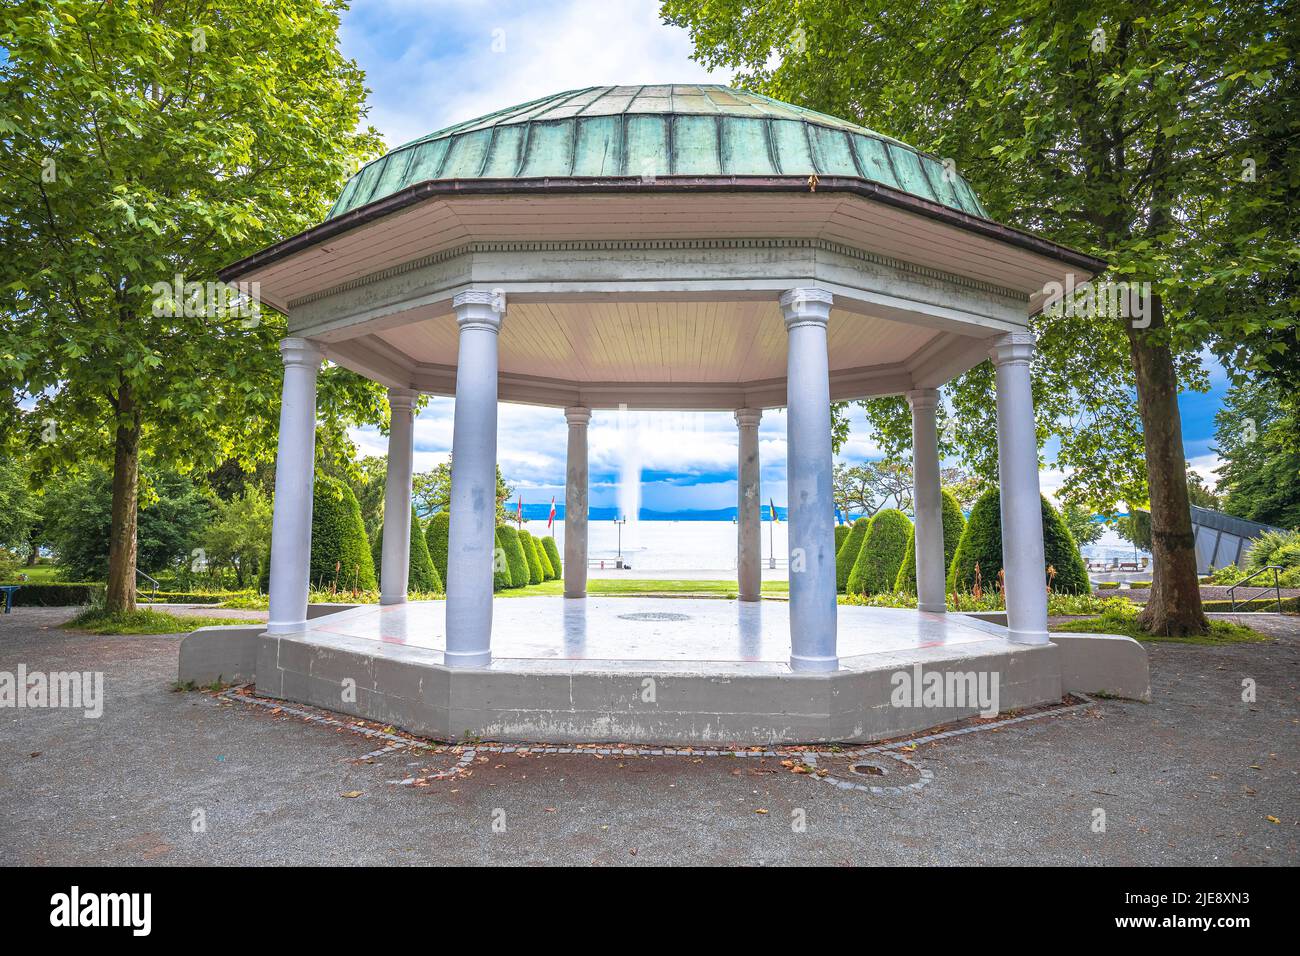 Friedrichshafen park by the Bodensee lake pavilion view, Baden-Württemberg region of Germany Stock Photo